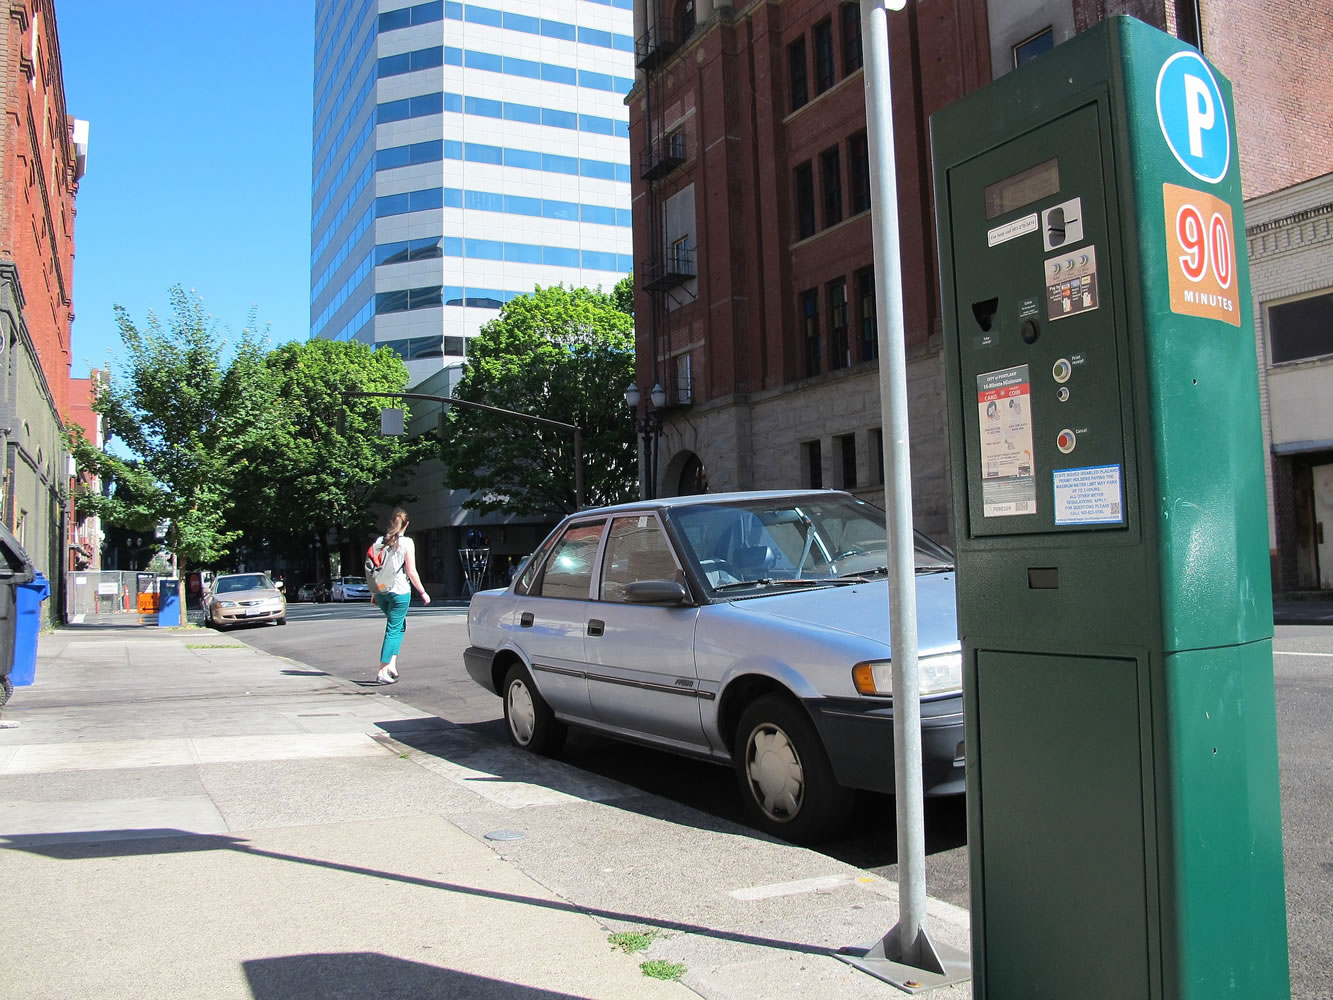 Open parking spots, a rarity in downtown Portland, are becoming more common, as seen on Thursday, since a change in the rules on July 1.